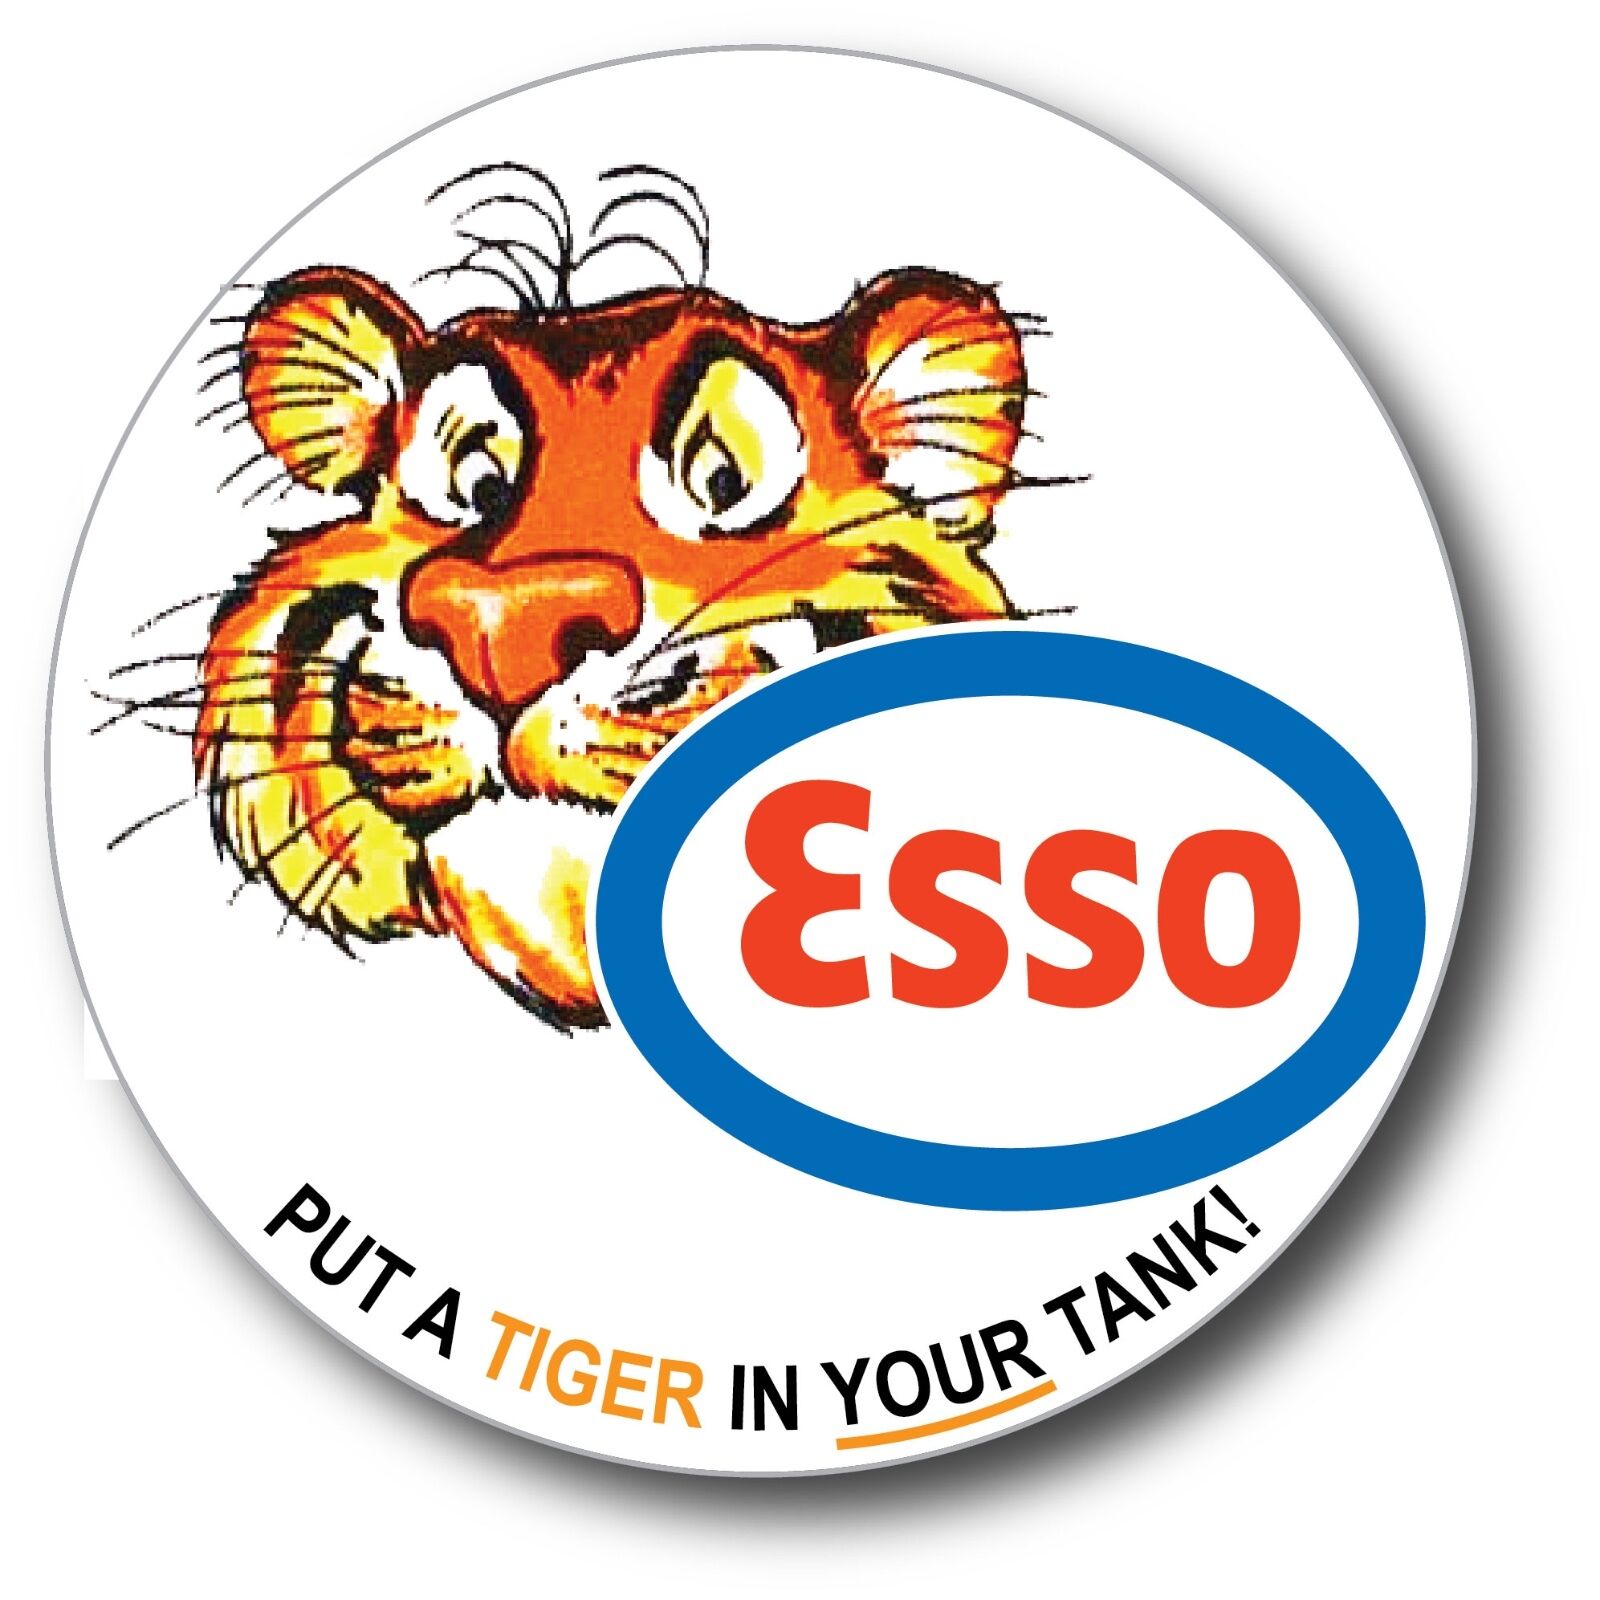 ESSO GASOLINE TIGER IN YOUR TANK HIGH GLOSS OUTDOOR 3.5 INCH DECAL STICKER  ESSO